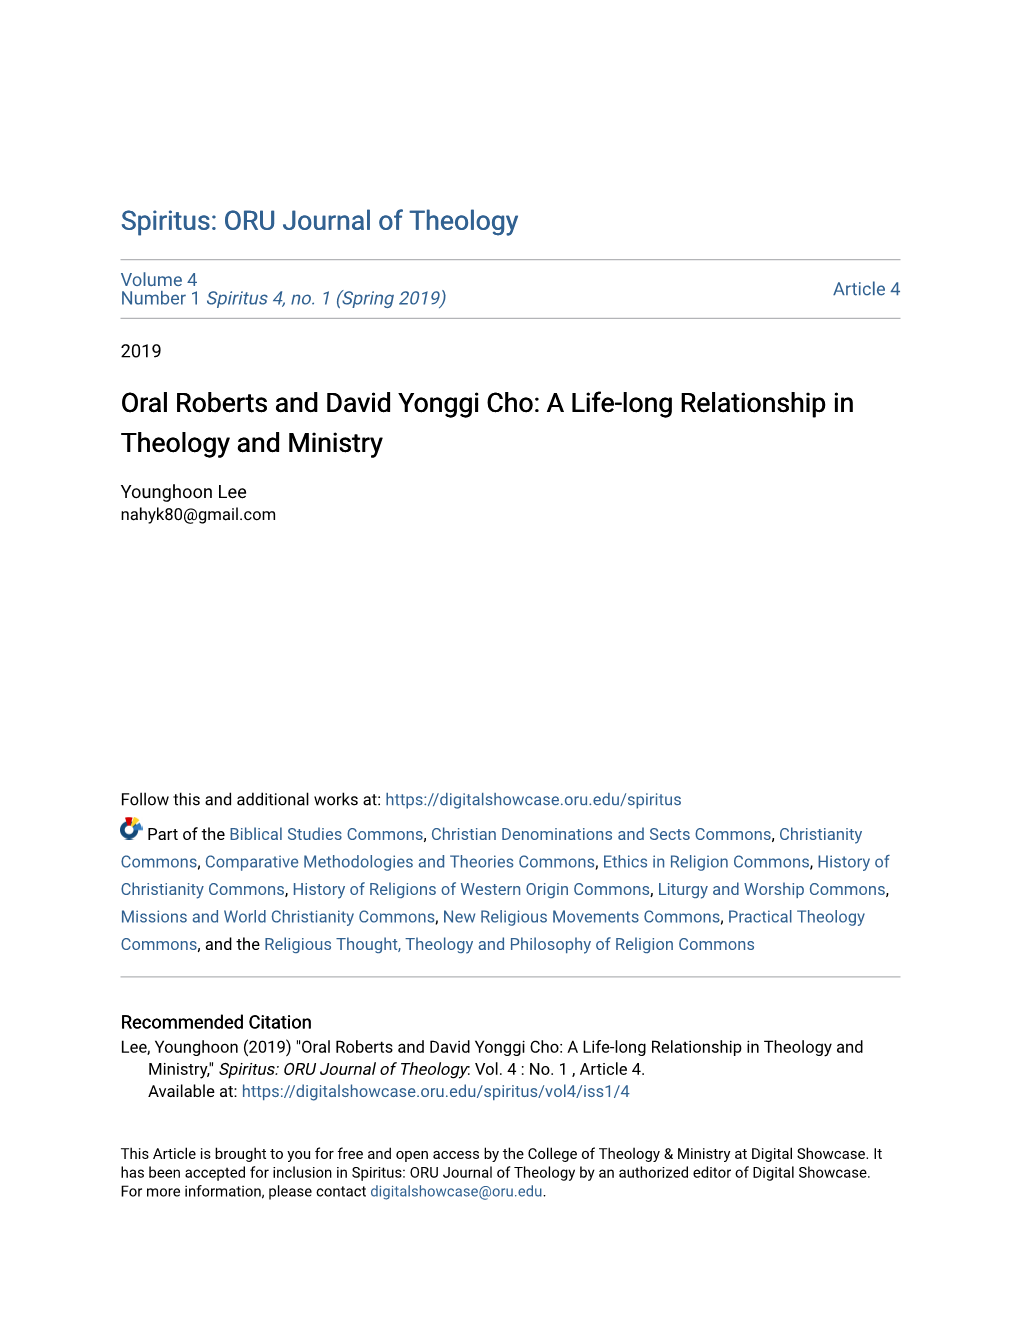 Oral Roberts and David Yonggi Cho: a Life-Long Relationship in Theology and Ministry